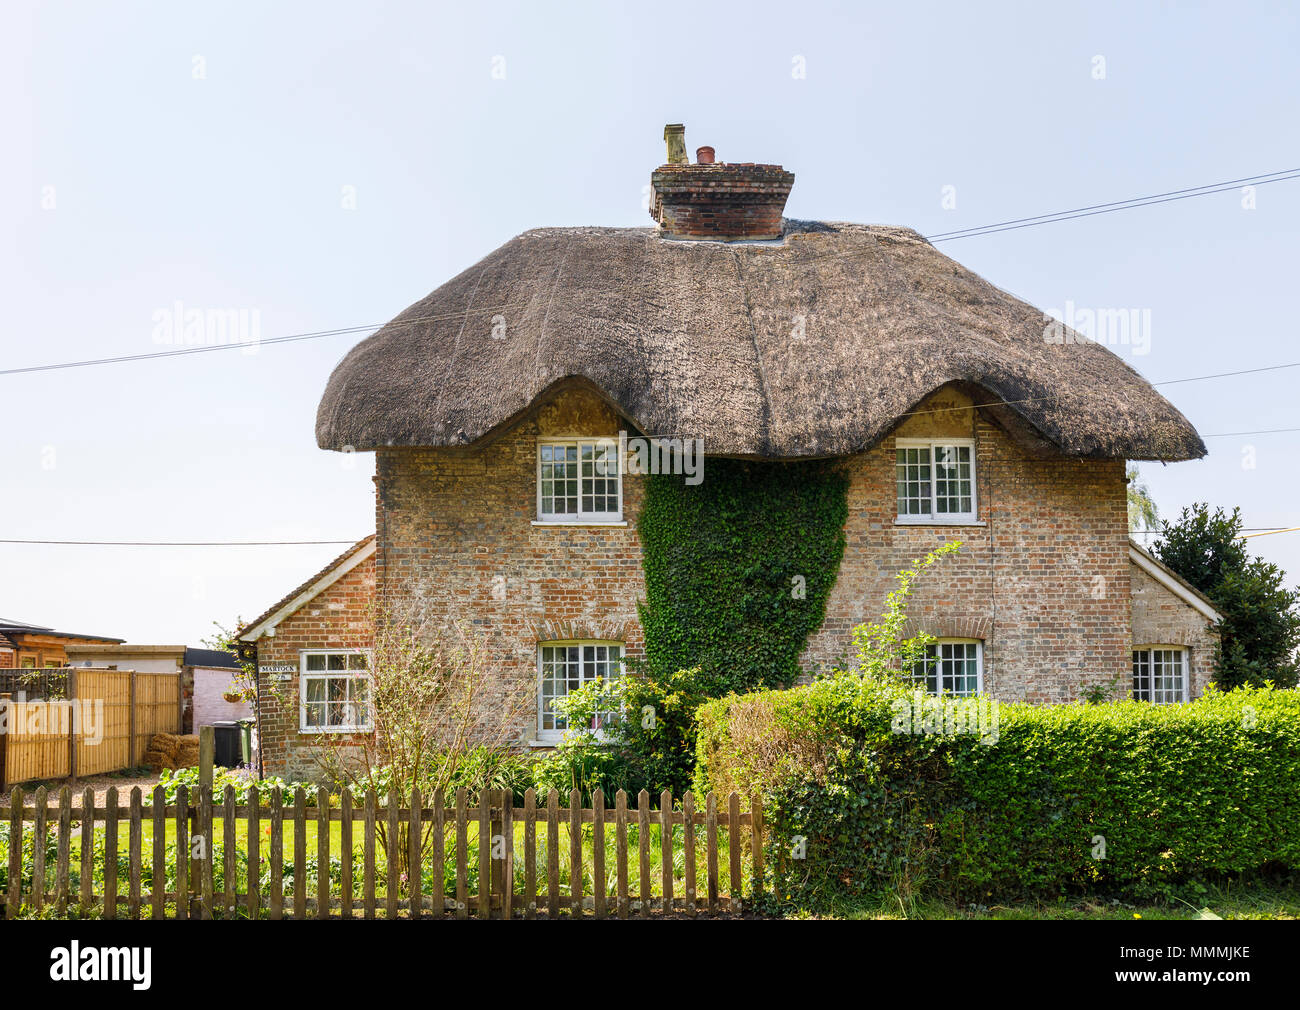 Attractive local architectural style traditional thatched cottage in East Stratton, a small village near Winchester in Hampshire, southern England Stock Photo